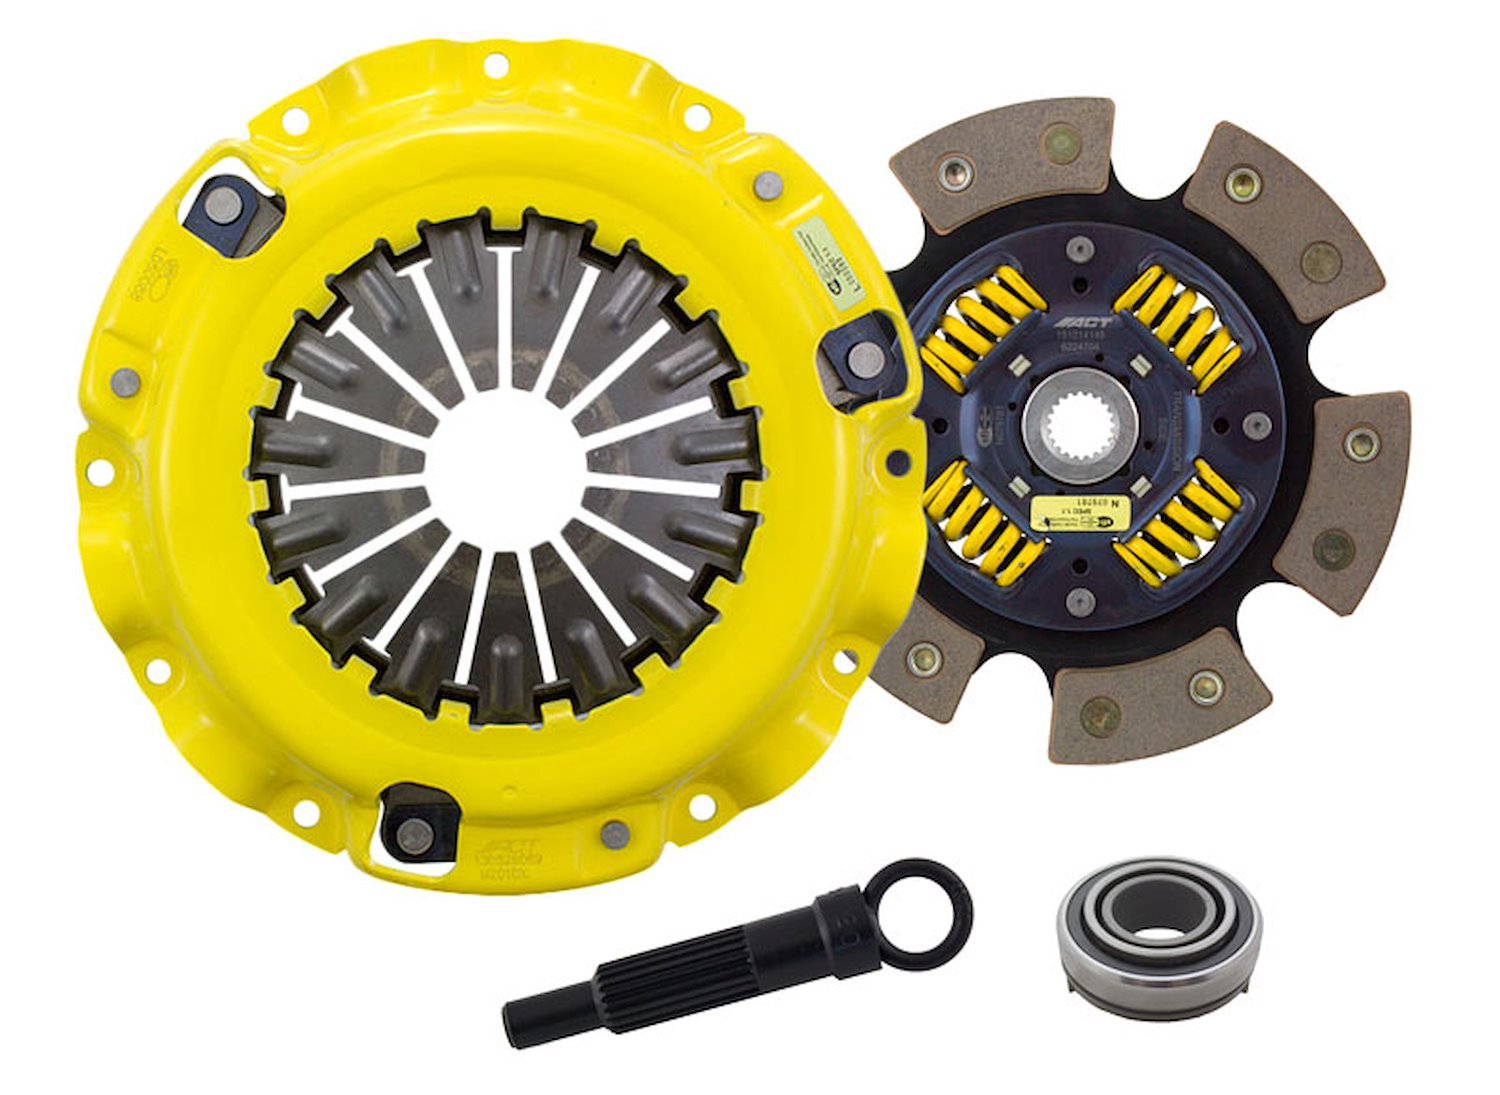 XT/Race Sprung 6-Pad Transmission Clutch Kit Fits Select Chrysler/Dodge/Eagle/Mitsubishi/Plymouth